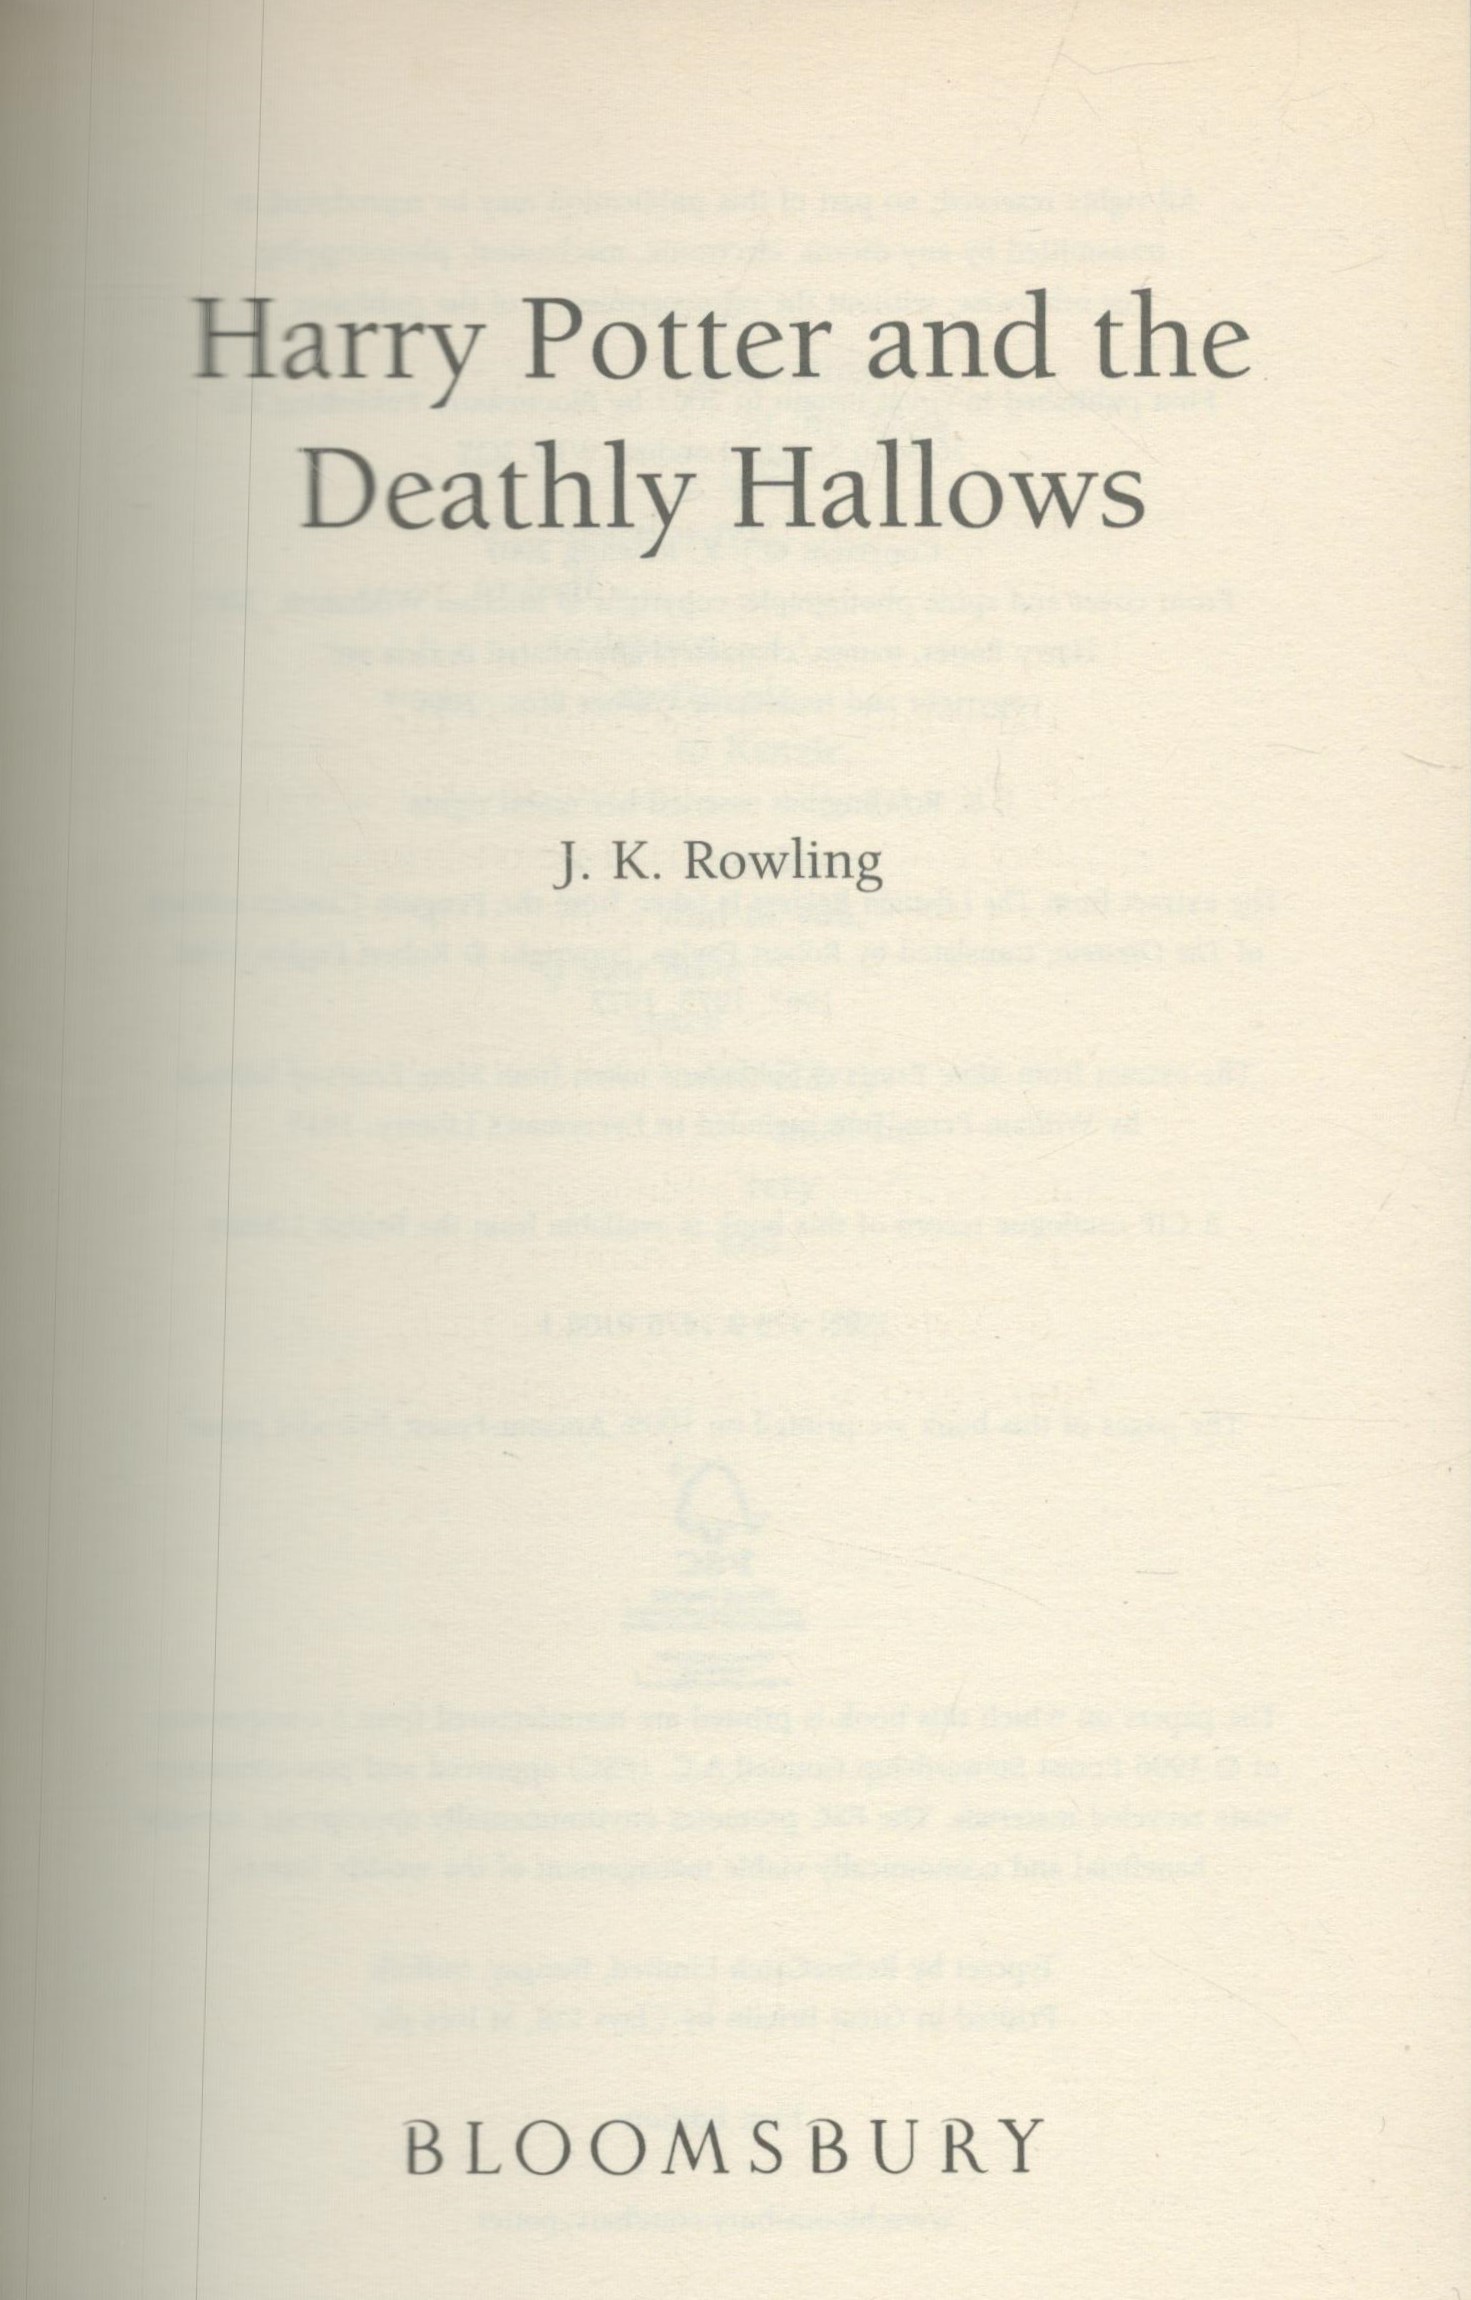 Harry Potter and the Deathly Hallows by J K Rowling 2007 hardback book with 607 pages, good - Image 2 of 3